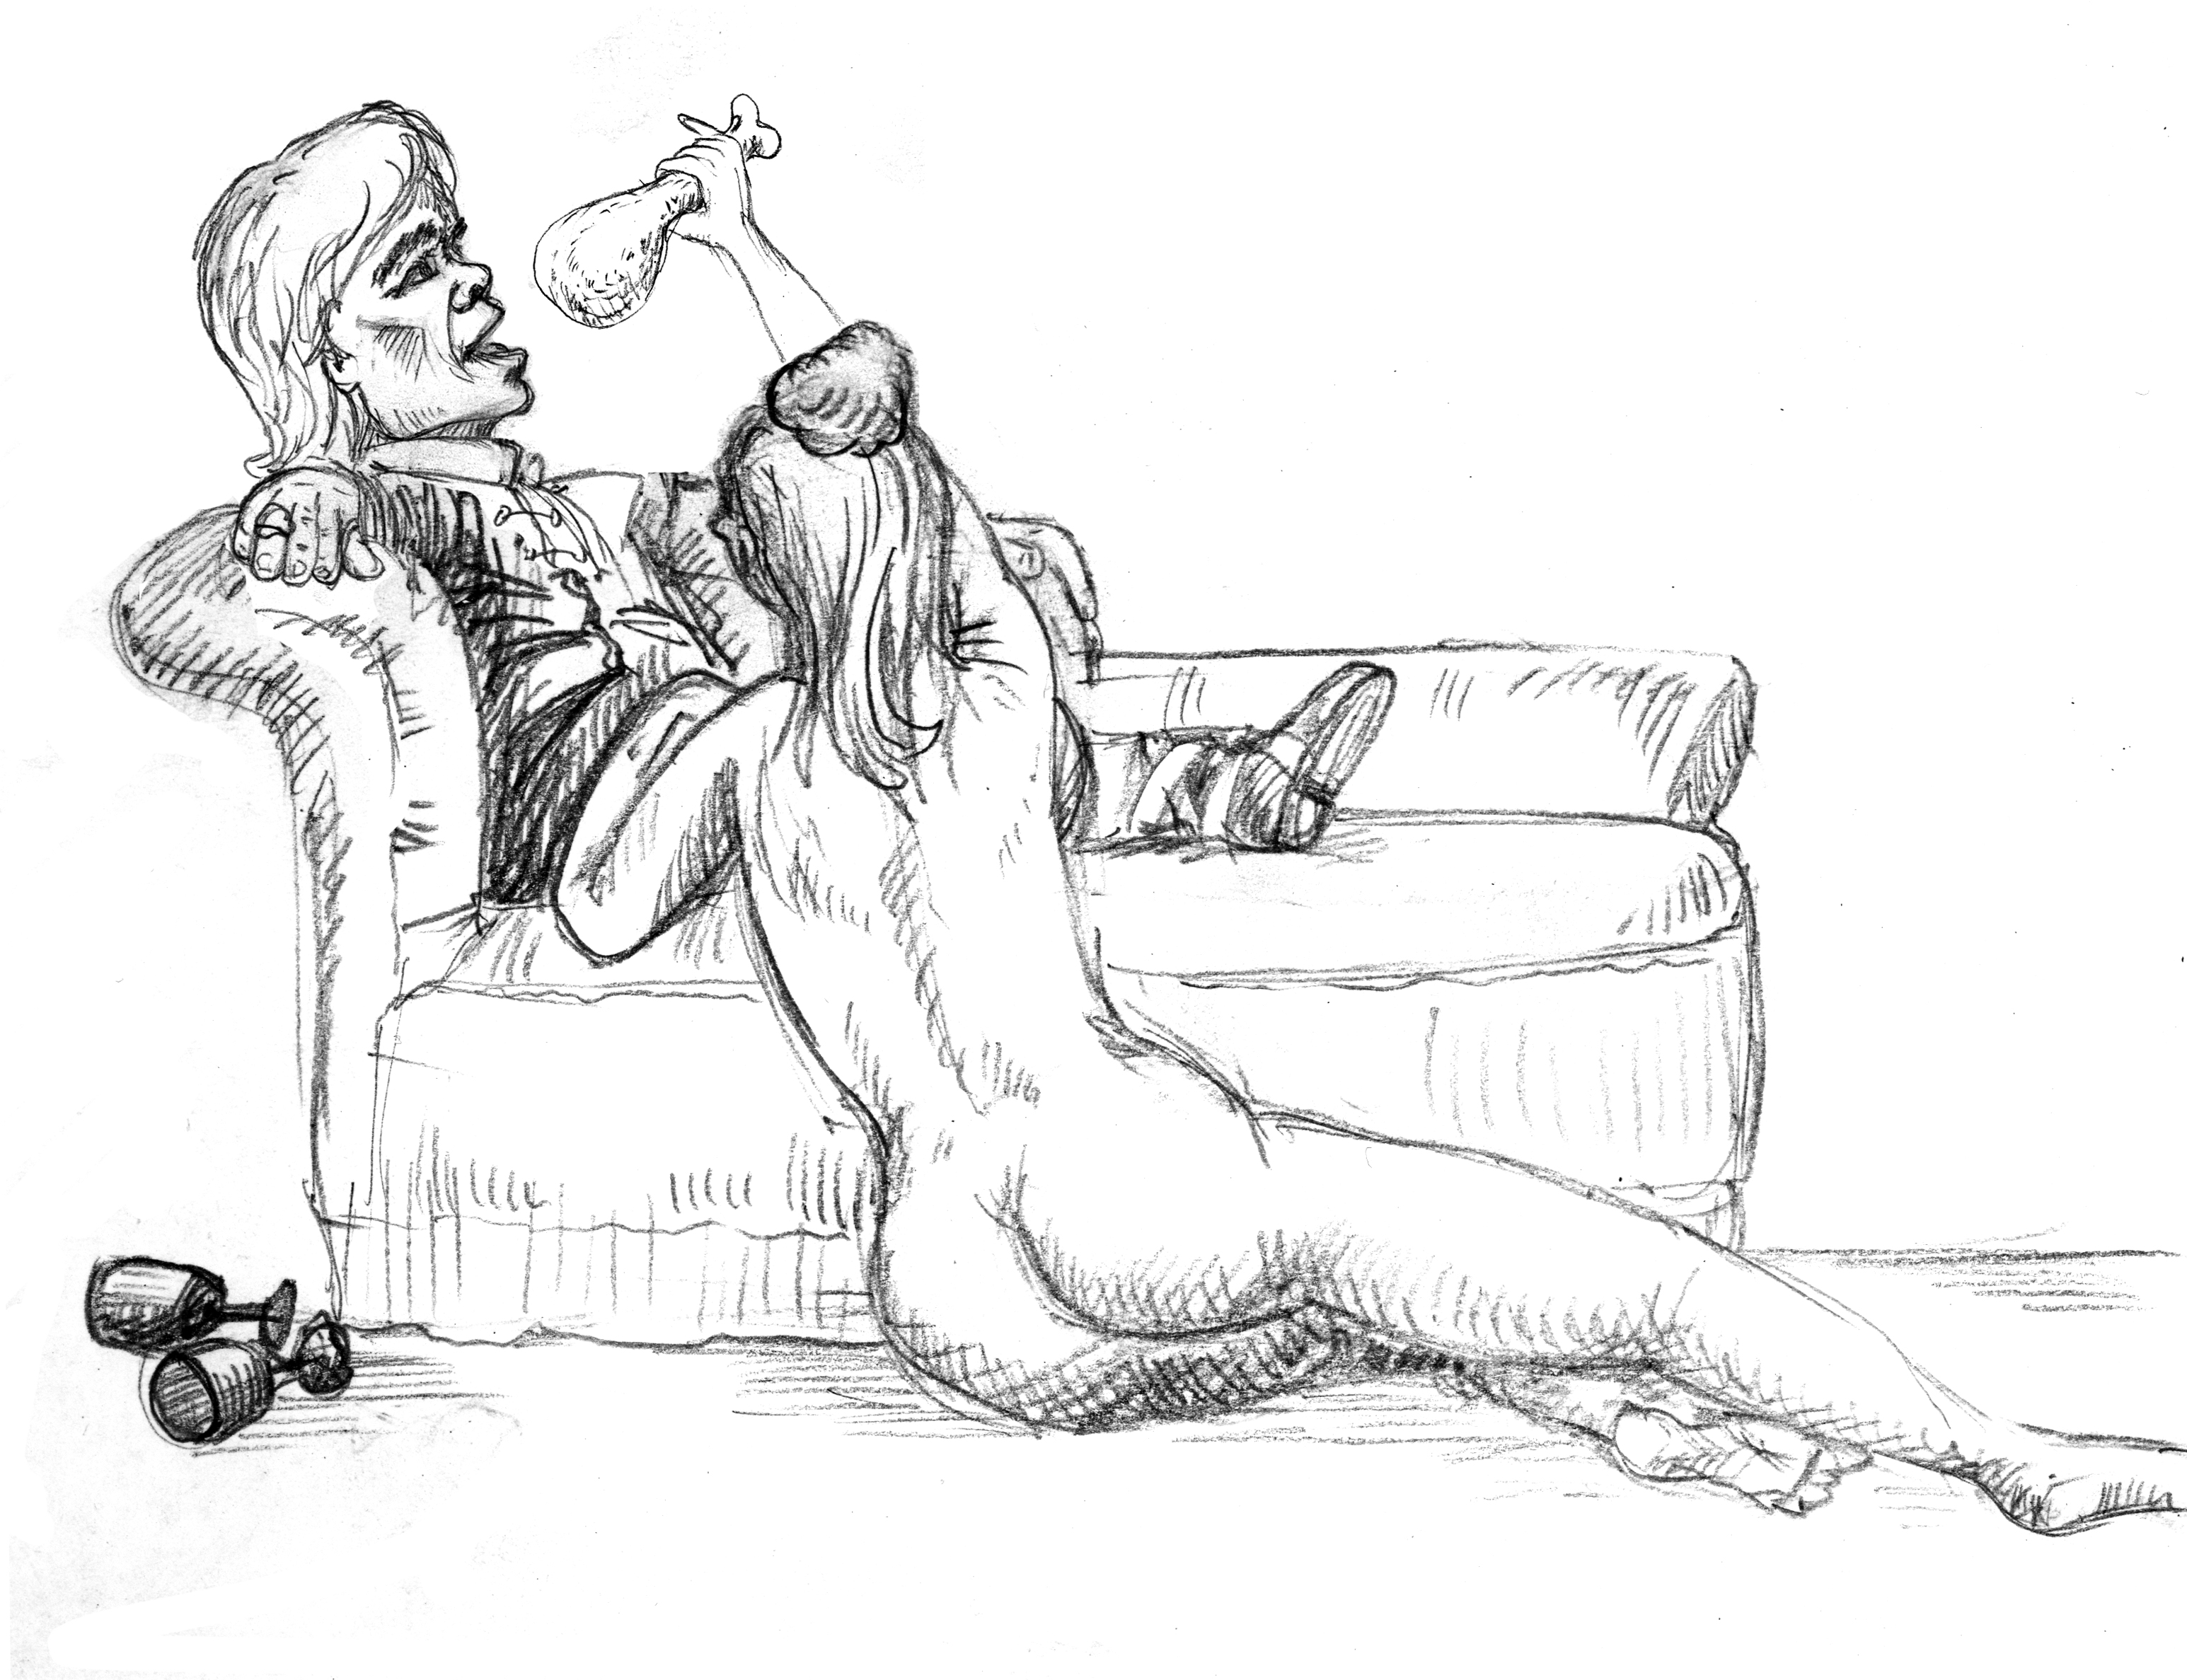  Tyrion Lennister, drawing, sketch, feeded by a naked woman, enjoying,